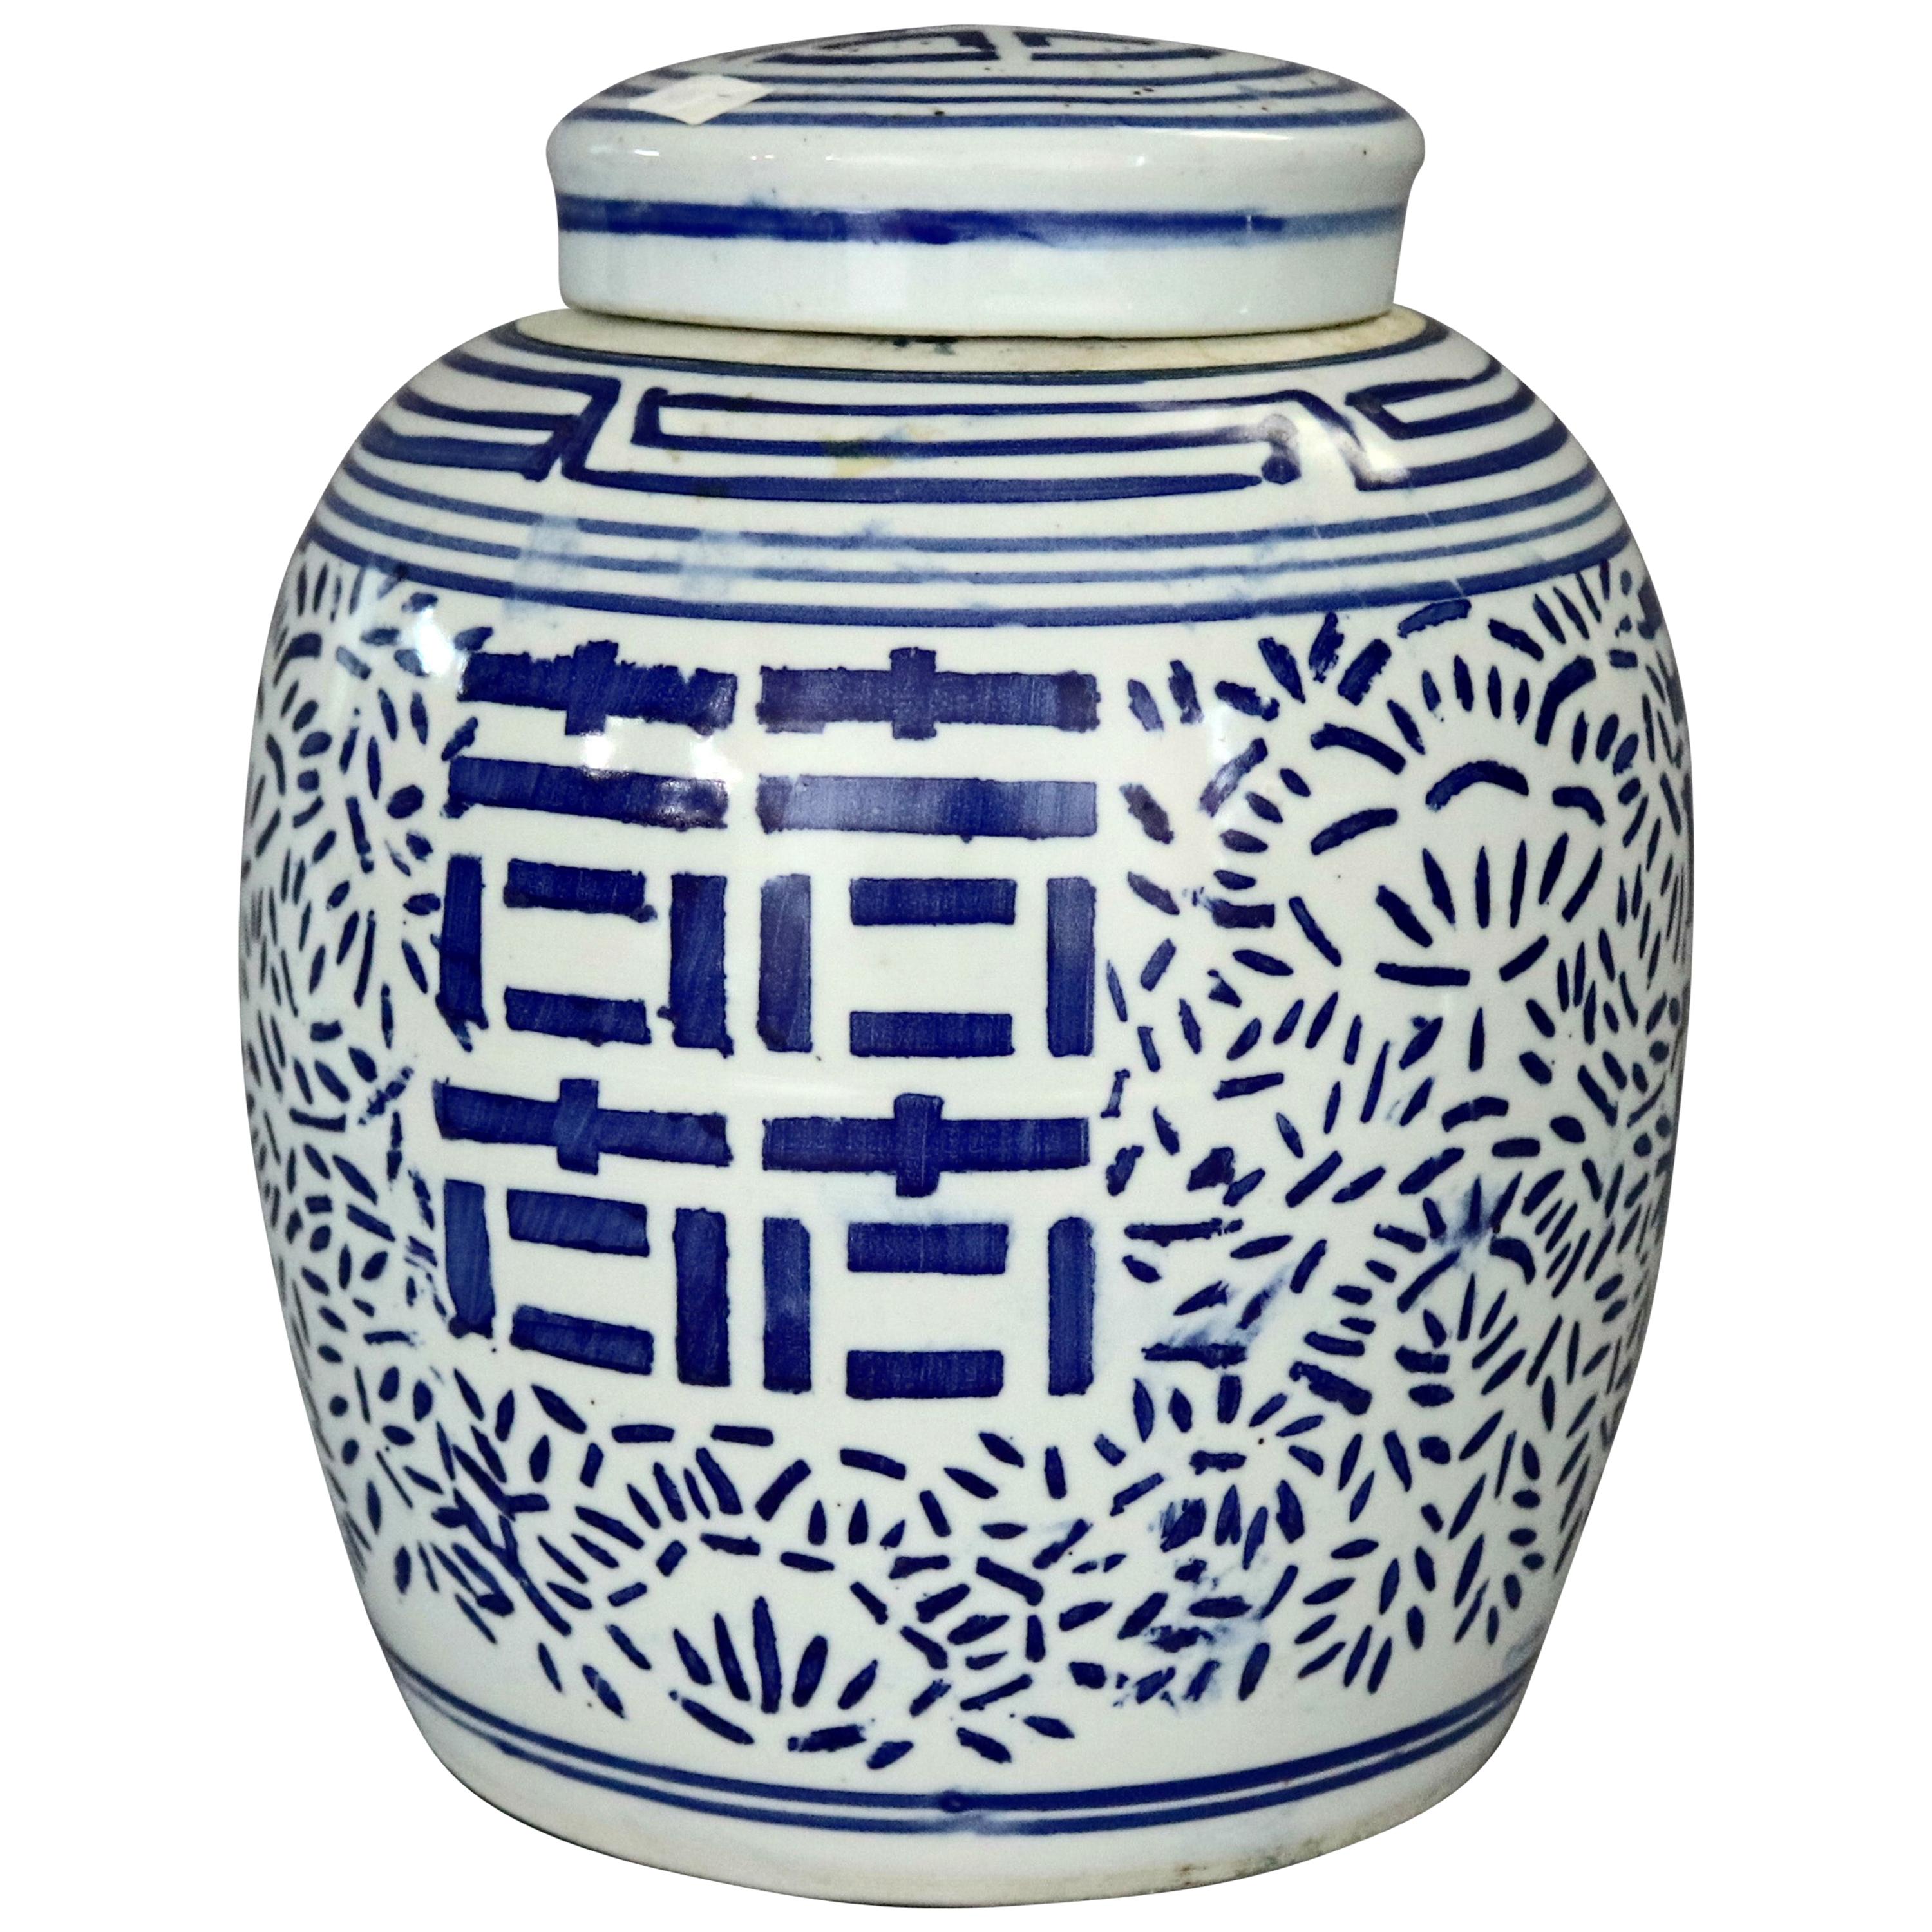 Vintage Chinese Blue and White Hand Decorated Porcelain Ginger Jar, 20th Century